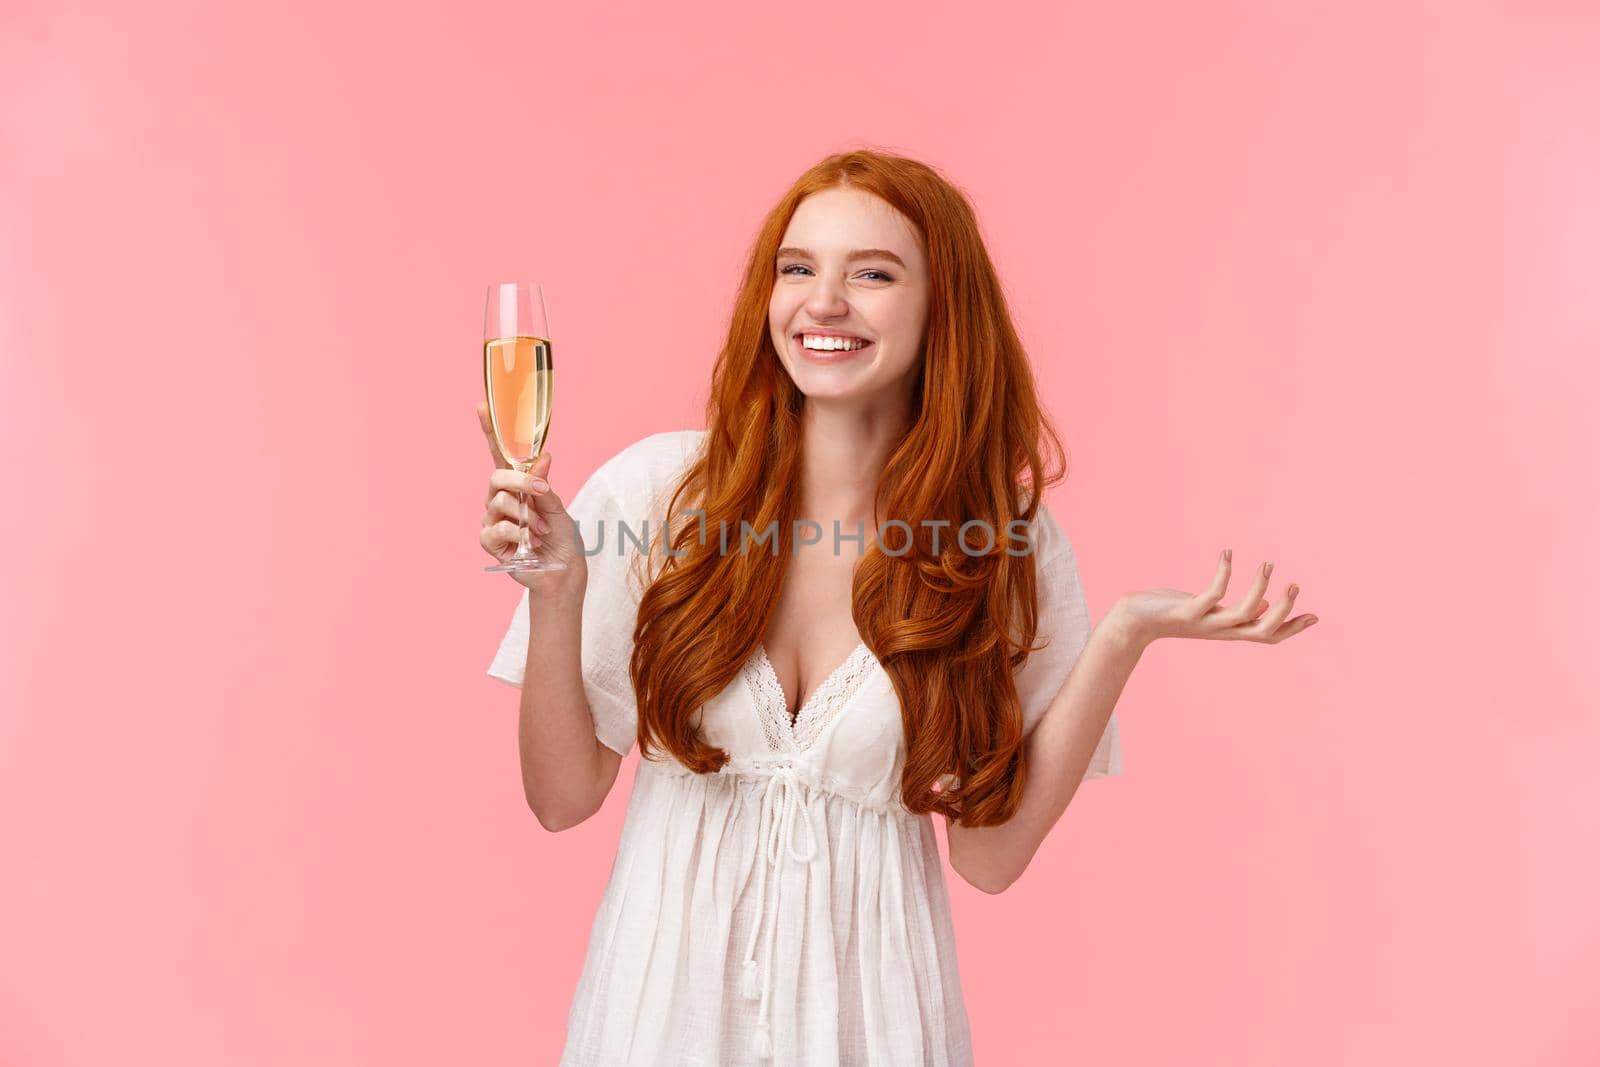 Lovely charismatic bride feeling happy and joyful, celebrating best day her lfie, looking camera amused, smiling raising glass champagne, drinking and partying, standing pink background.